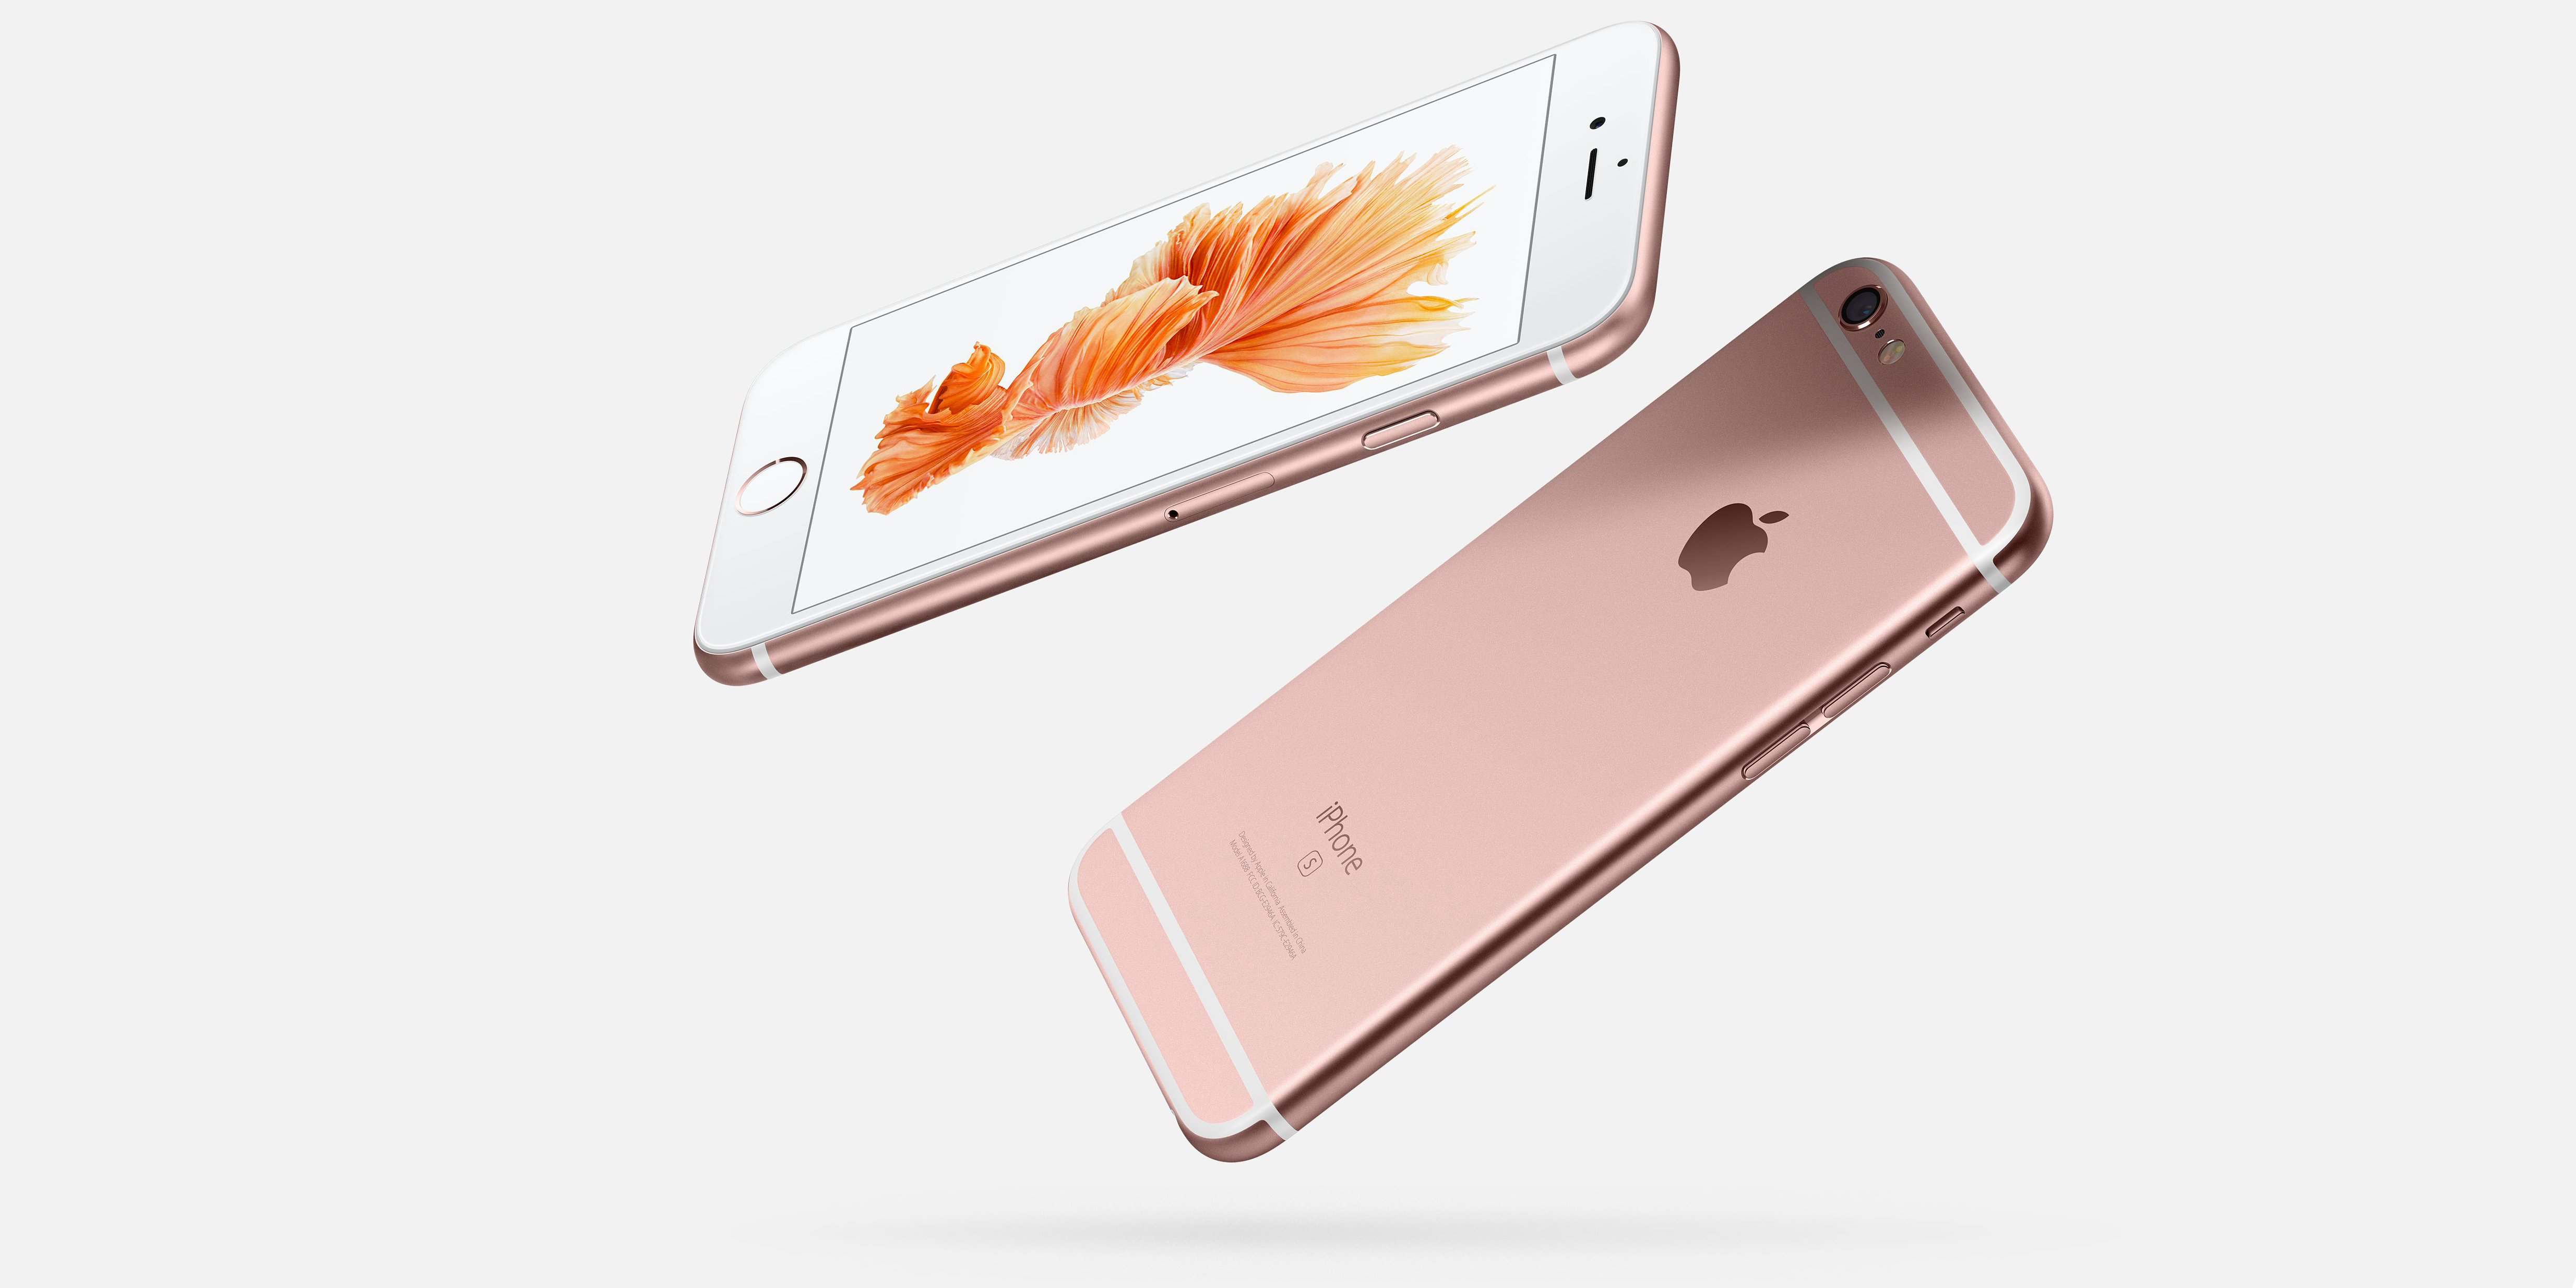 Apple’s Previous Gen Iphone 6s Outsold Samsung’s New Flagship Models Last Year 9to5mac